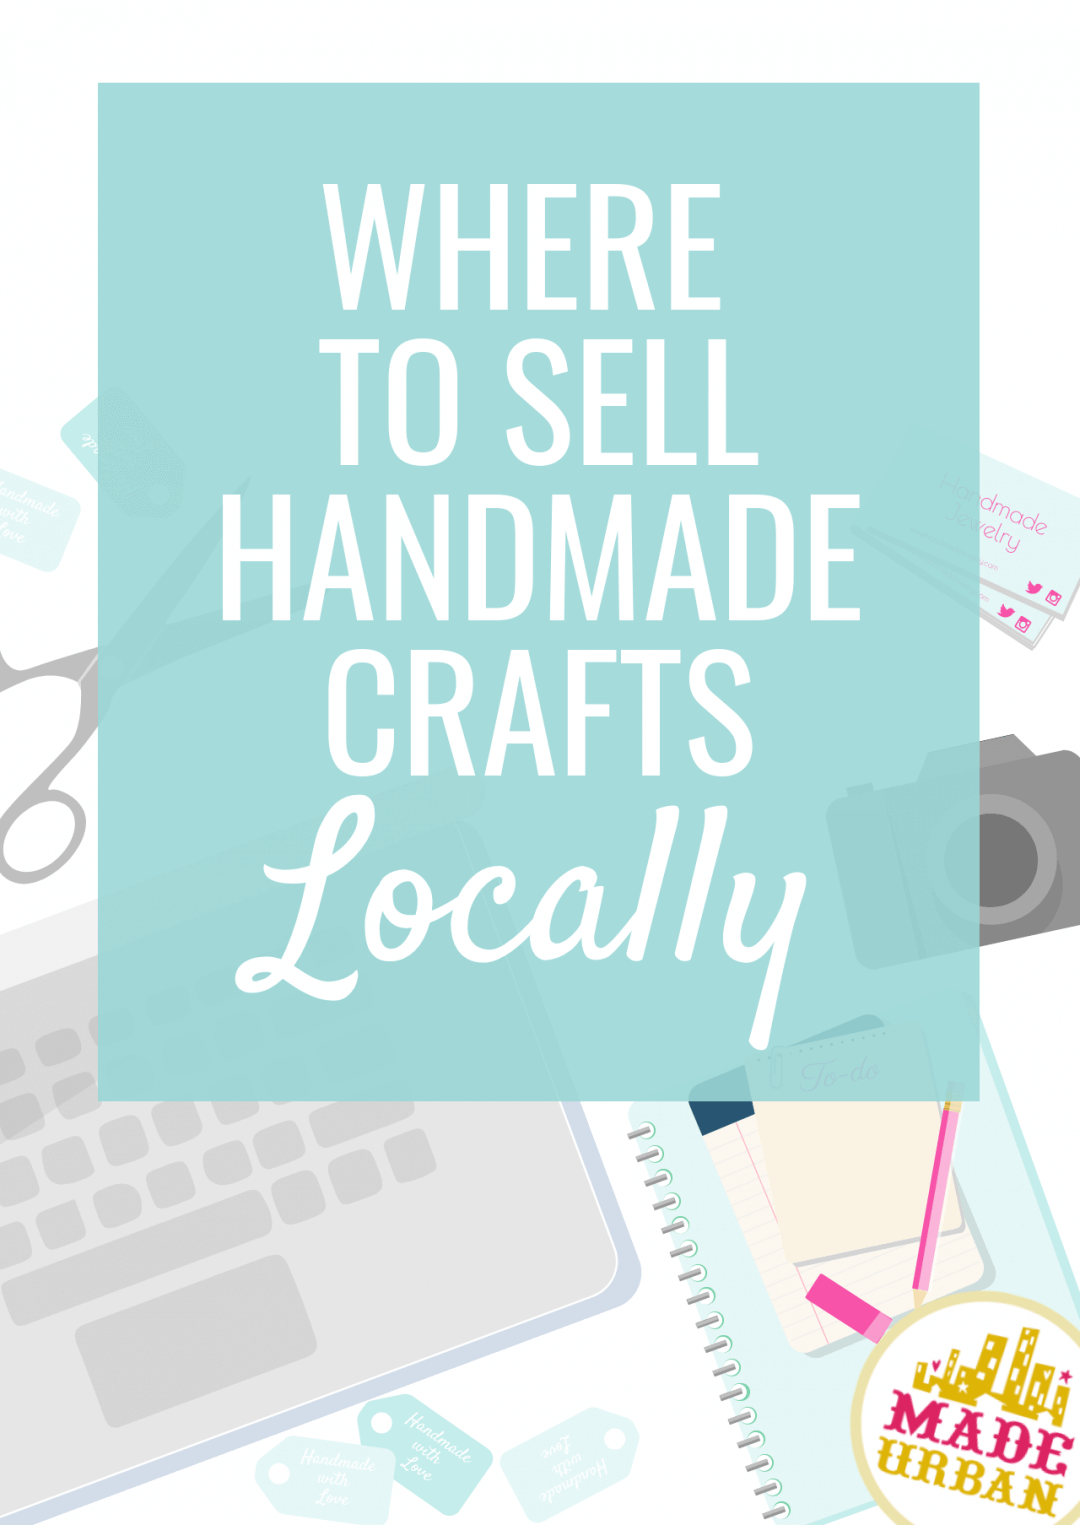 Where to Sell Handmade Crafts Locally - Made Urban